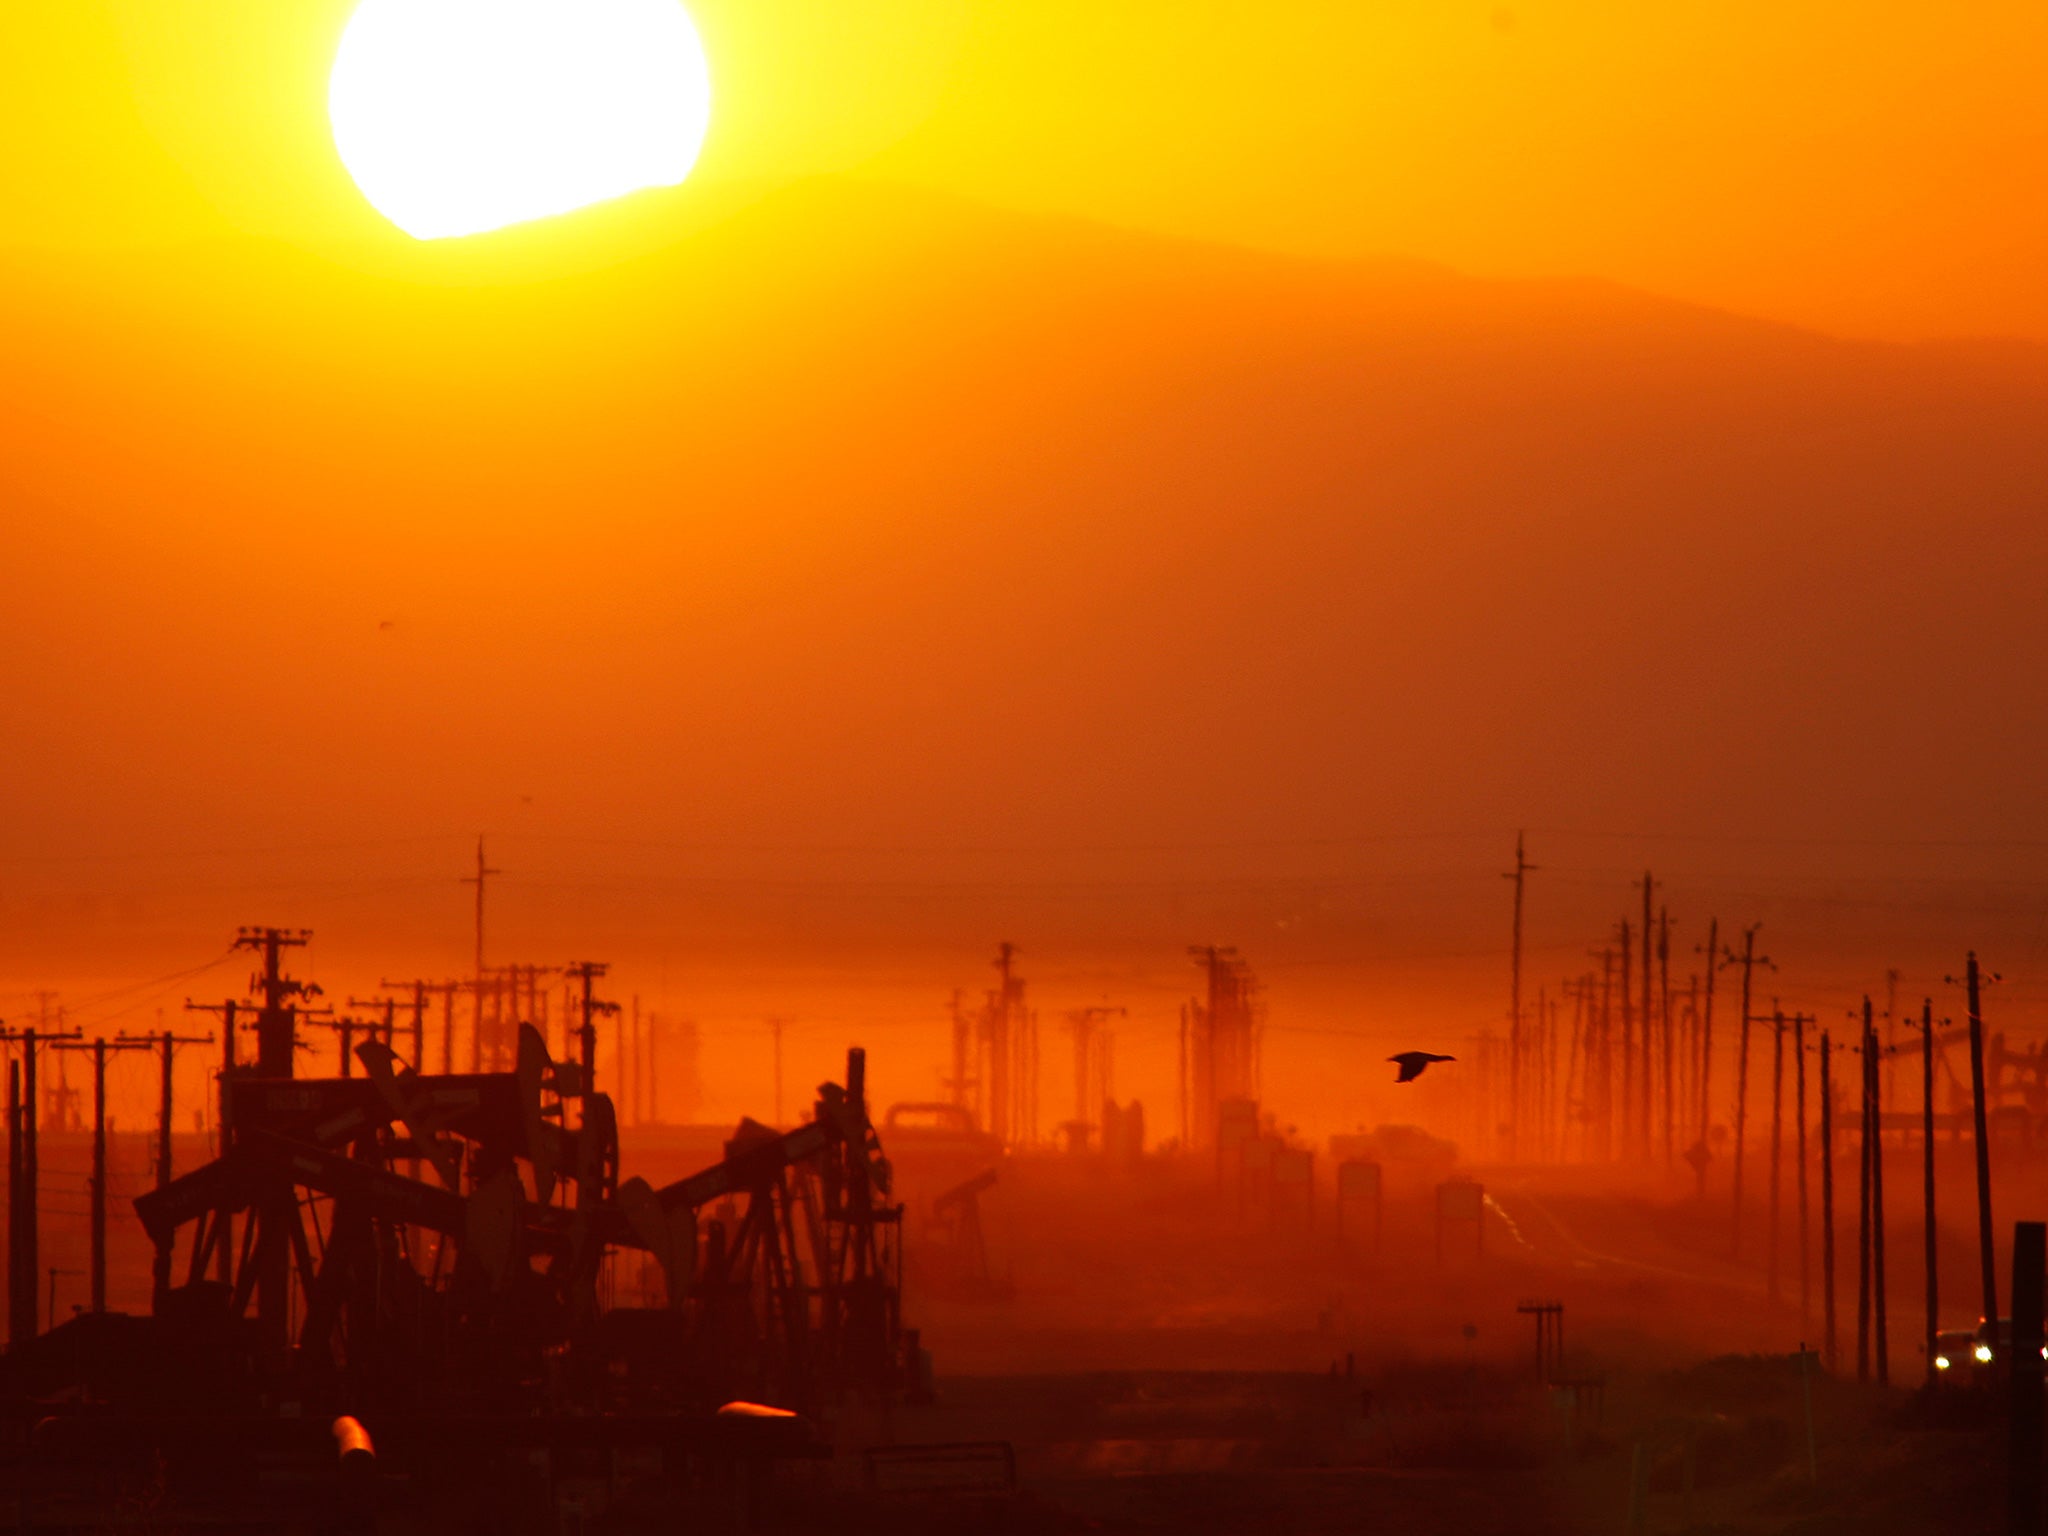 The sun rises over an oil field over the Monterey Shale formation where gas and oil extraction using hydraulic fracturing, or fracking, is on the verge of a boom on March 24, 2014 near Lost Hills, California